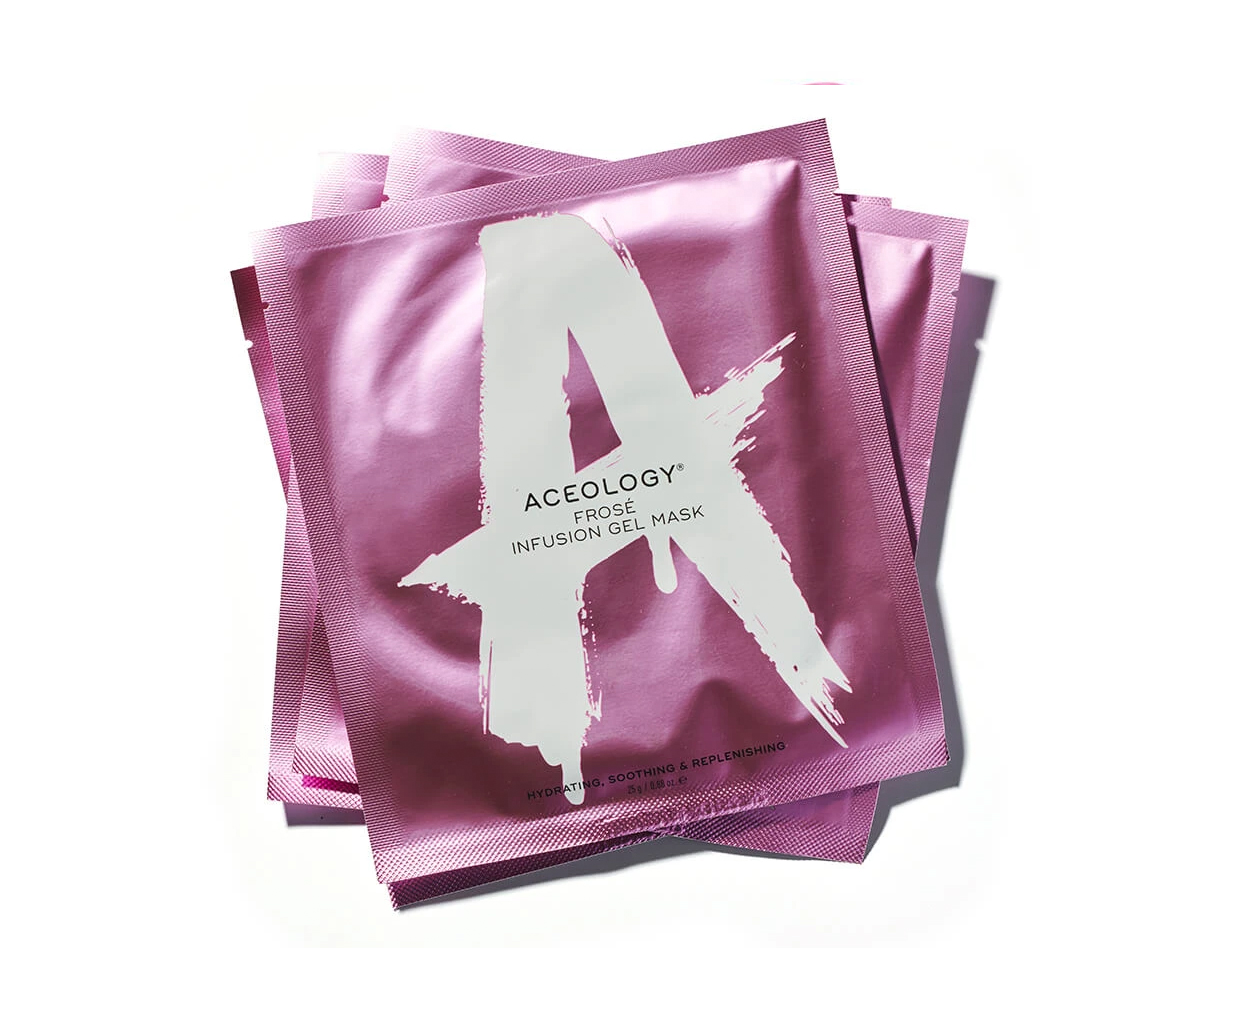 frose infusion gel masks packaging